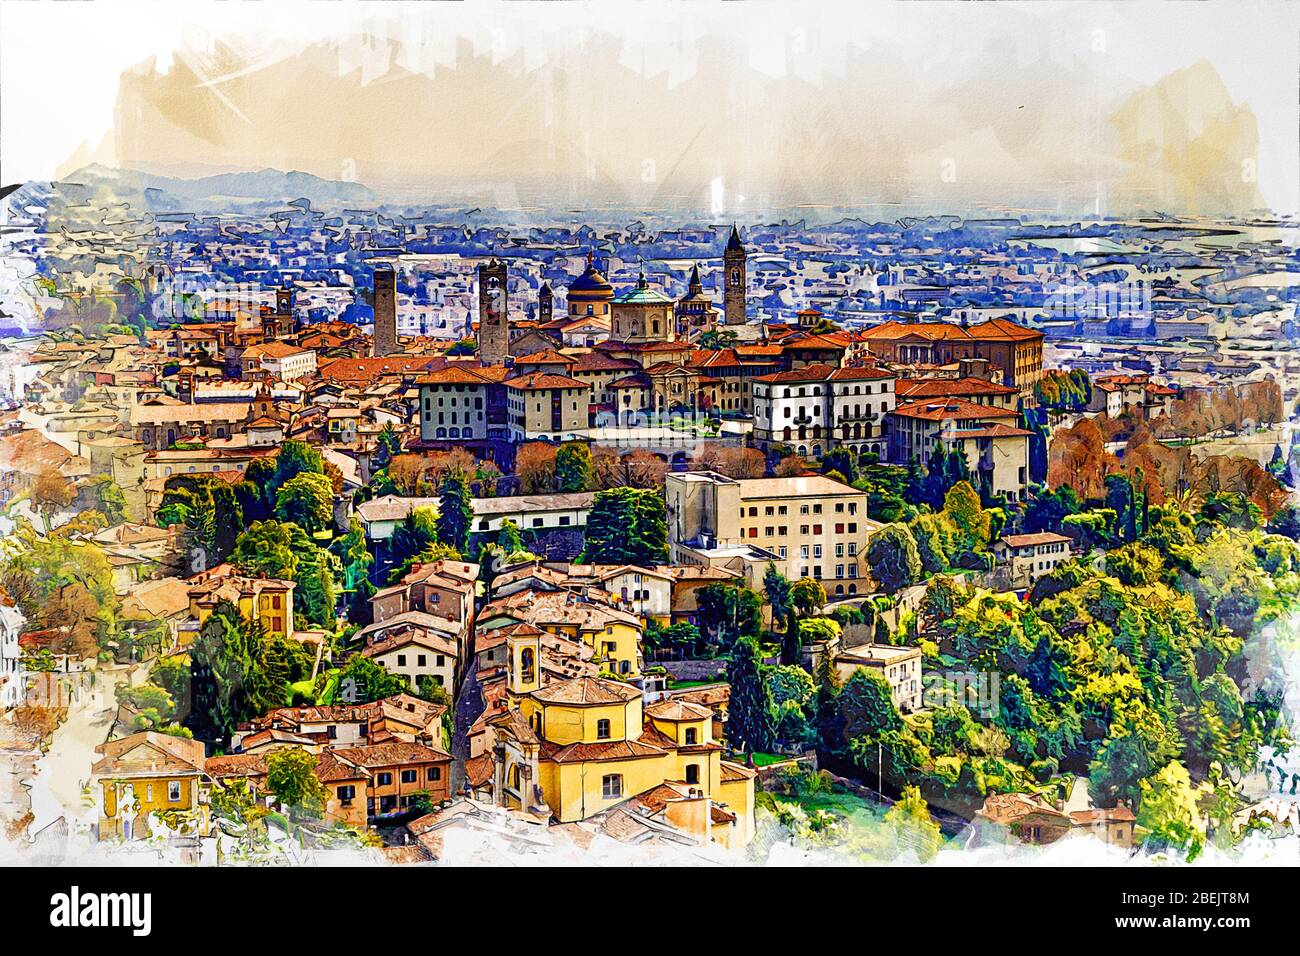 Panoramic veiw on Upper old city (Citta Alta) in Bergamo with historic buildings. Color pencil and watercolor sketch style illustration. Stock Photo